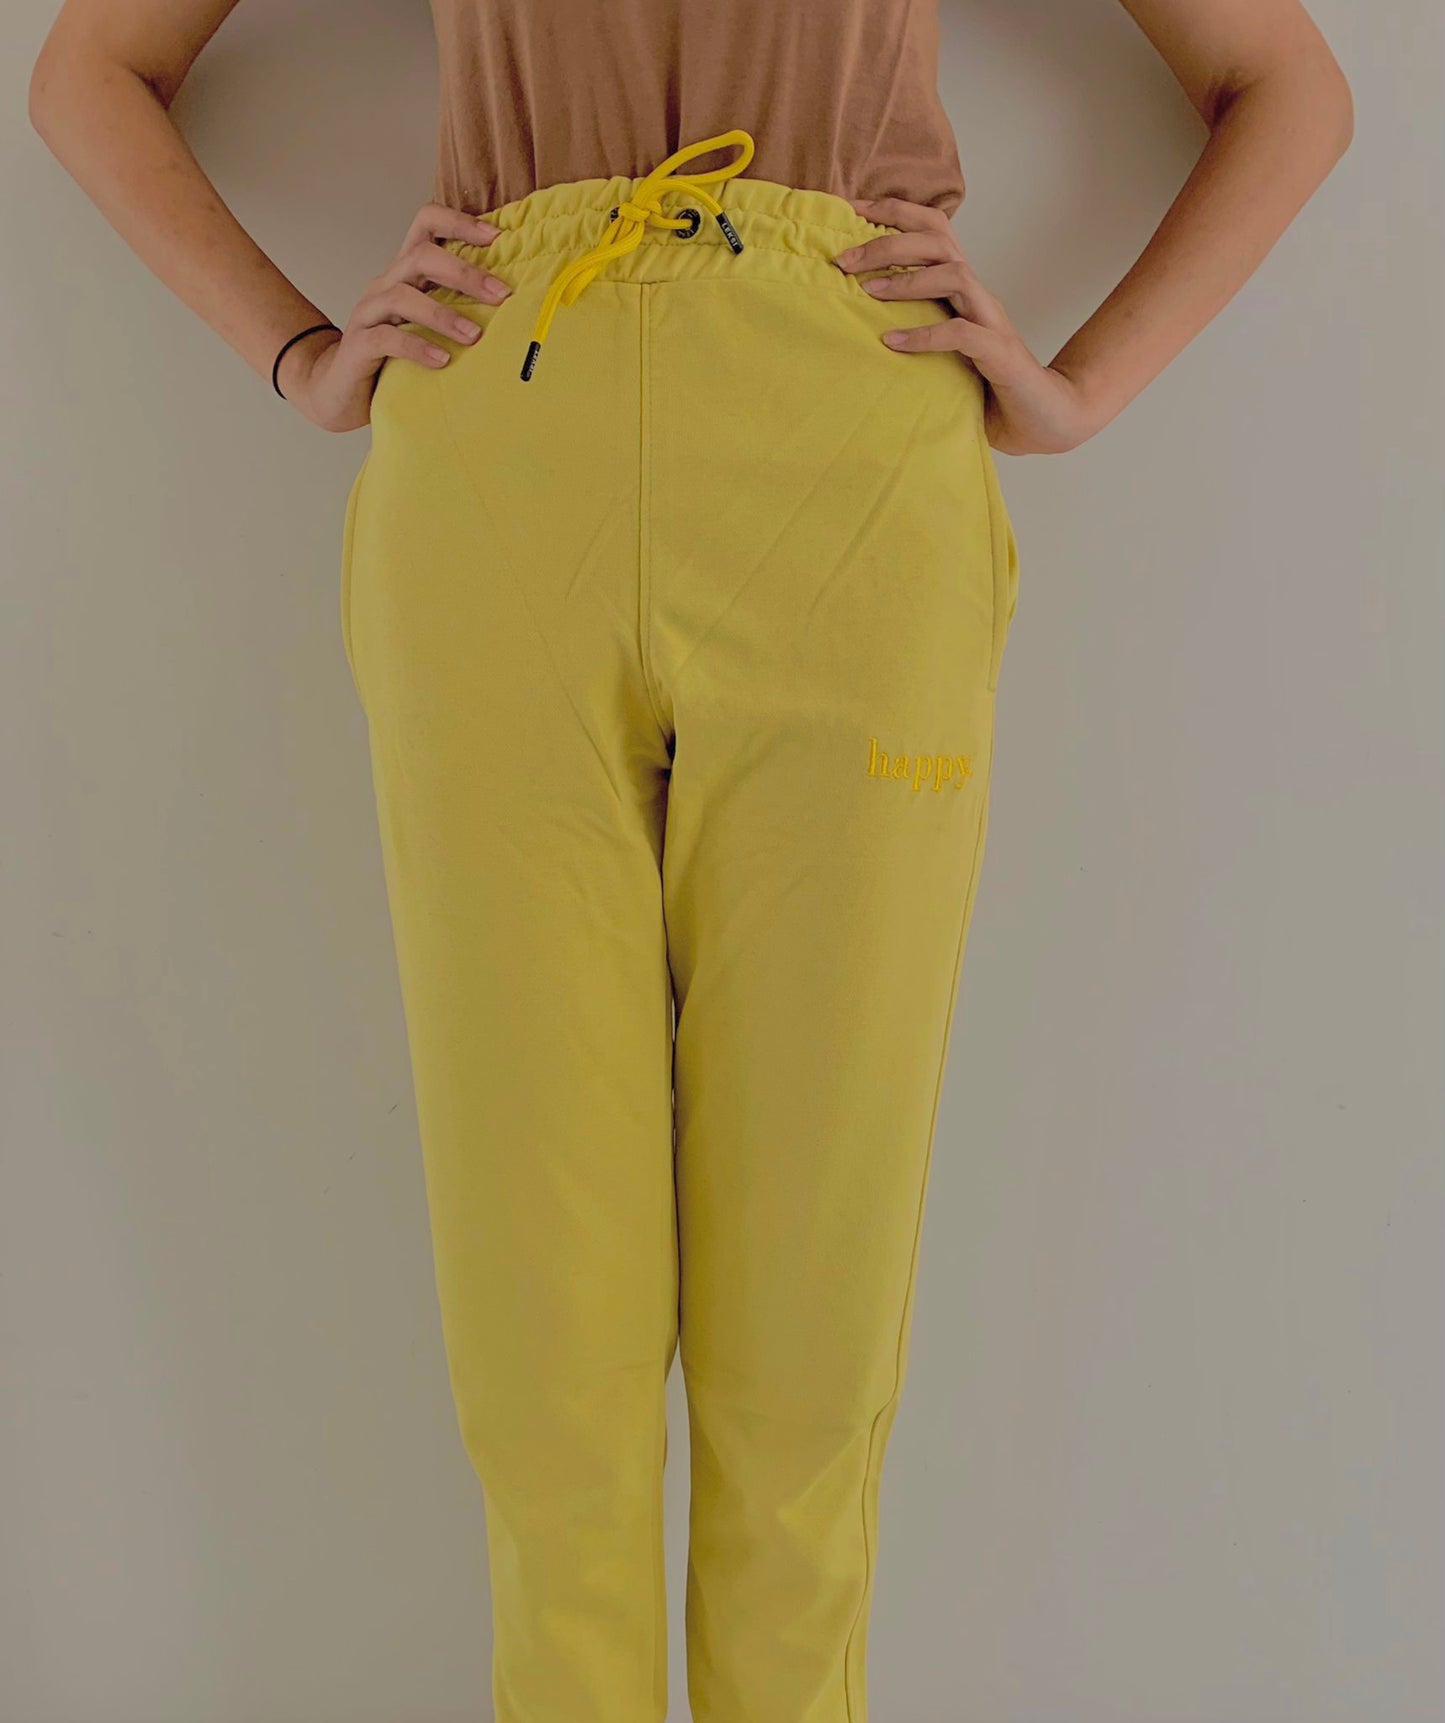 Mustard Yellow Unisex Sweatpants - MOOD (Happy) - French Terry (Summer-Friendly)